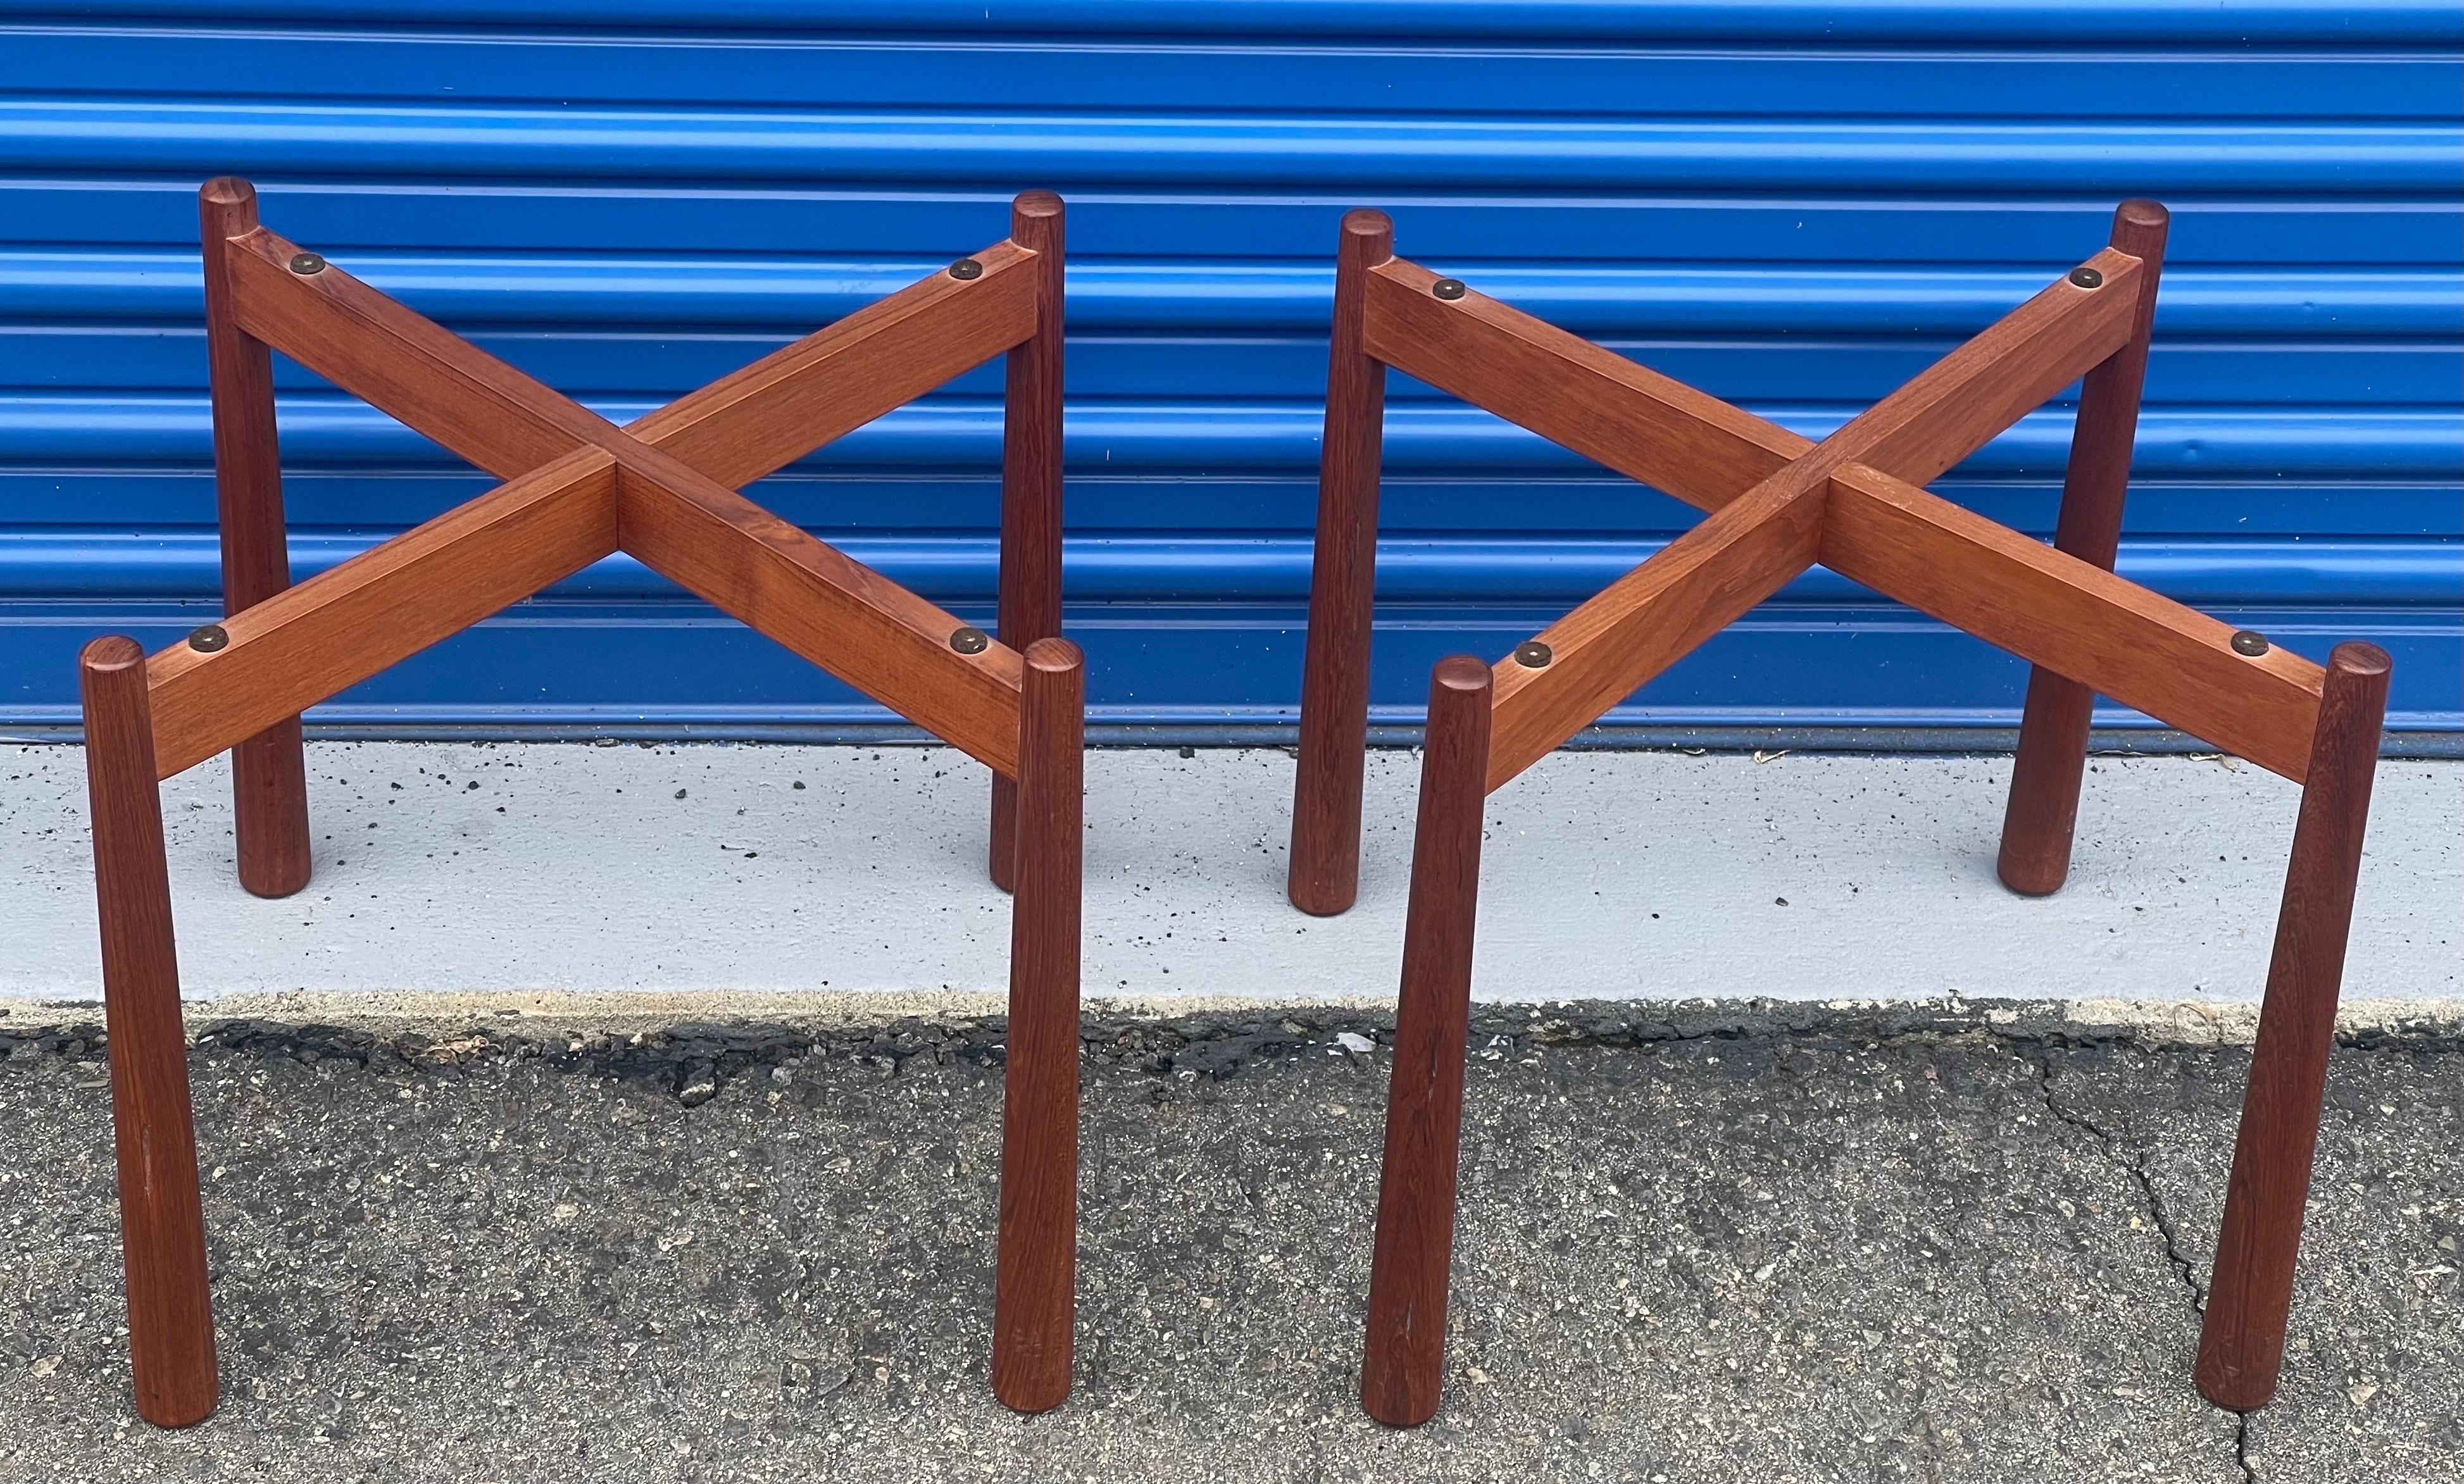 Pair of Teak Tray Side Tables Attributed to Jens Quistgaard for DUX of Sweden For Sale 10